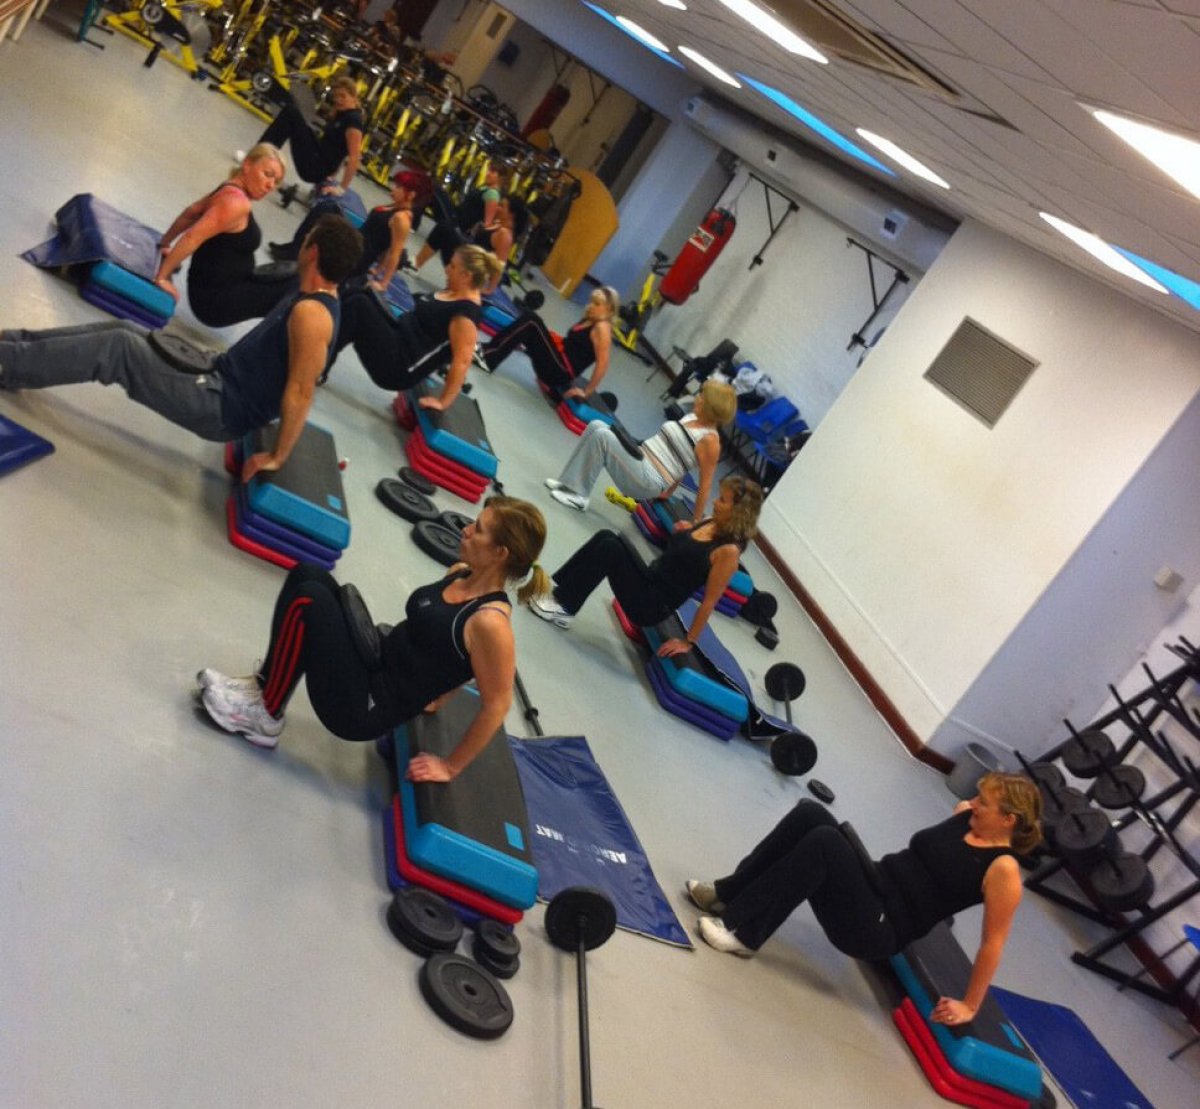 Exrecise class at leisure centre